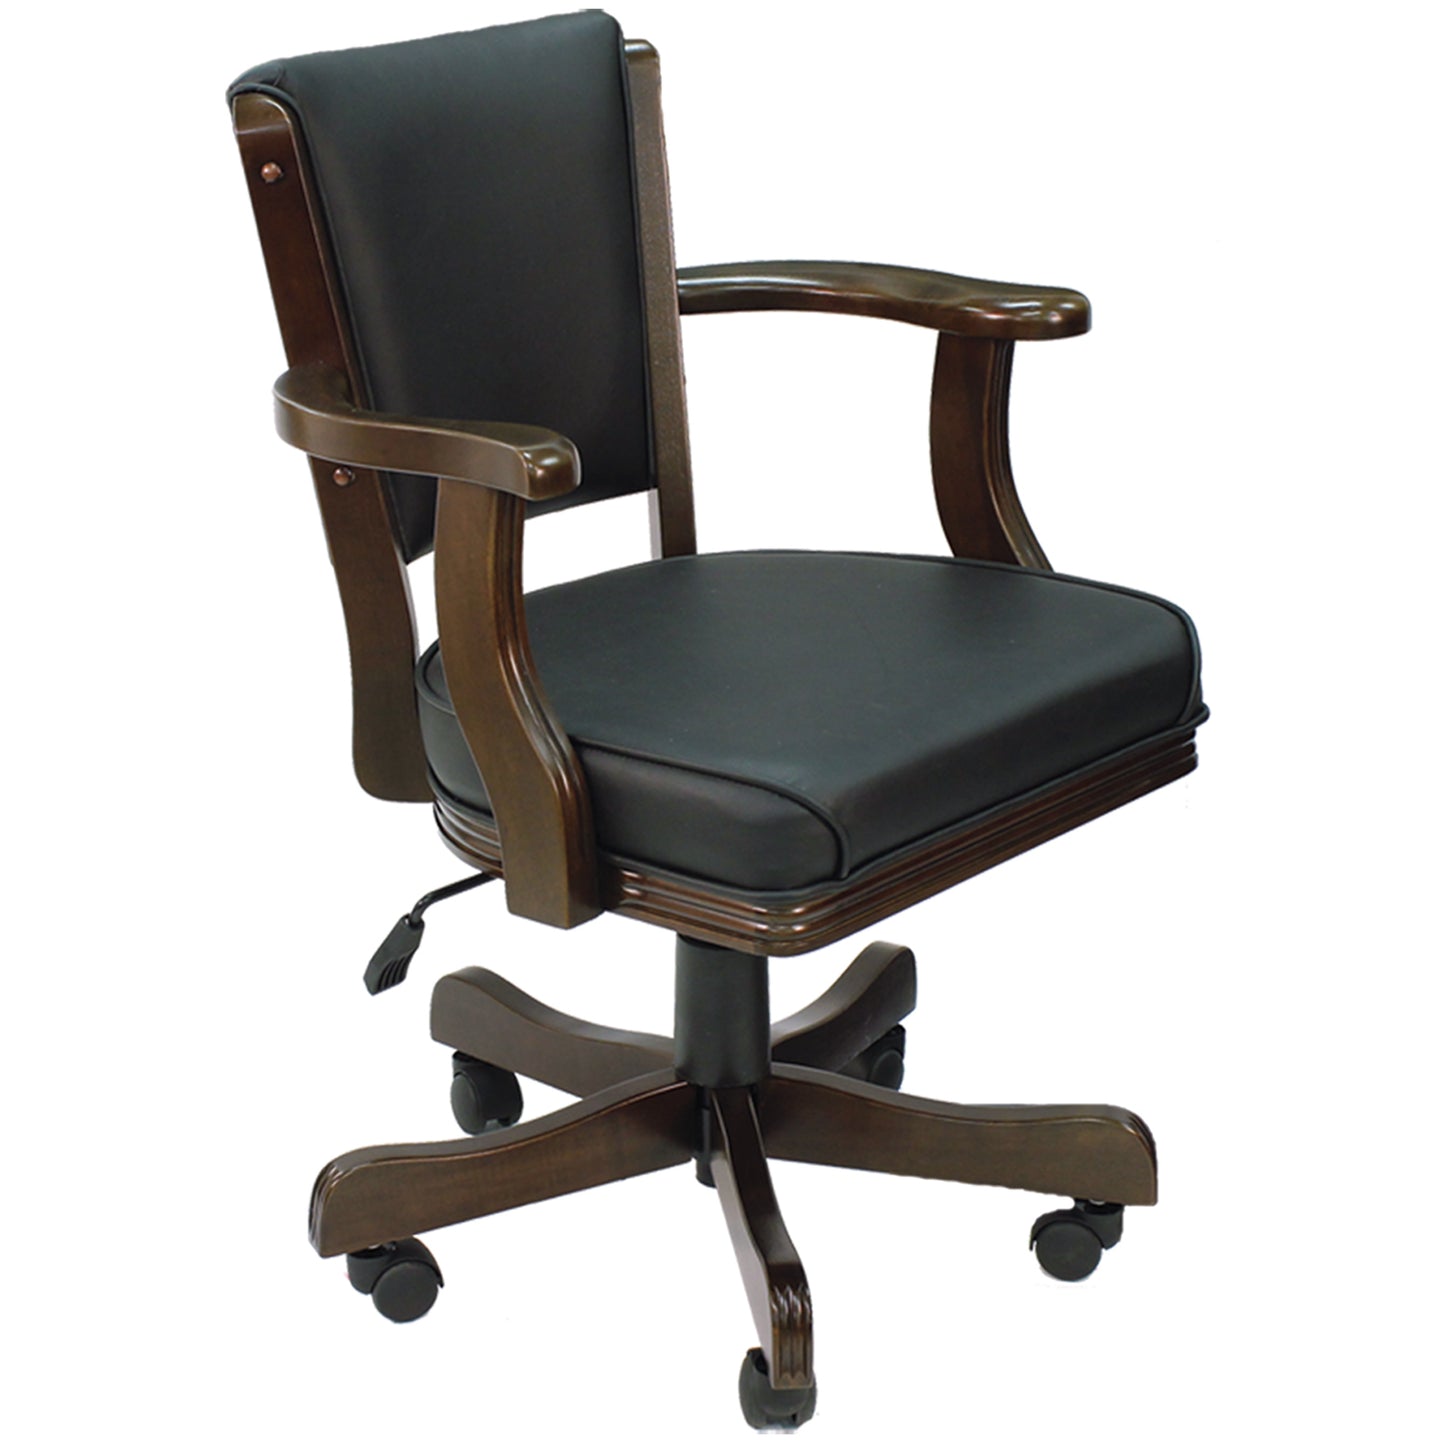 Vinyl padded swivel game chair with arm rests in a cappuccino finish.